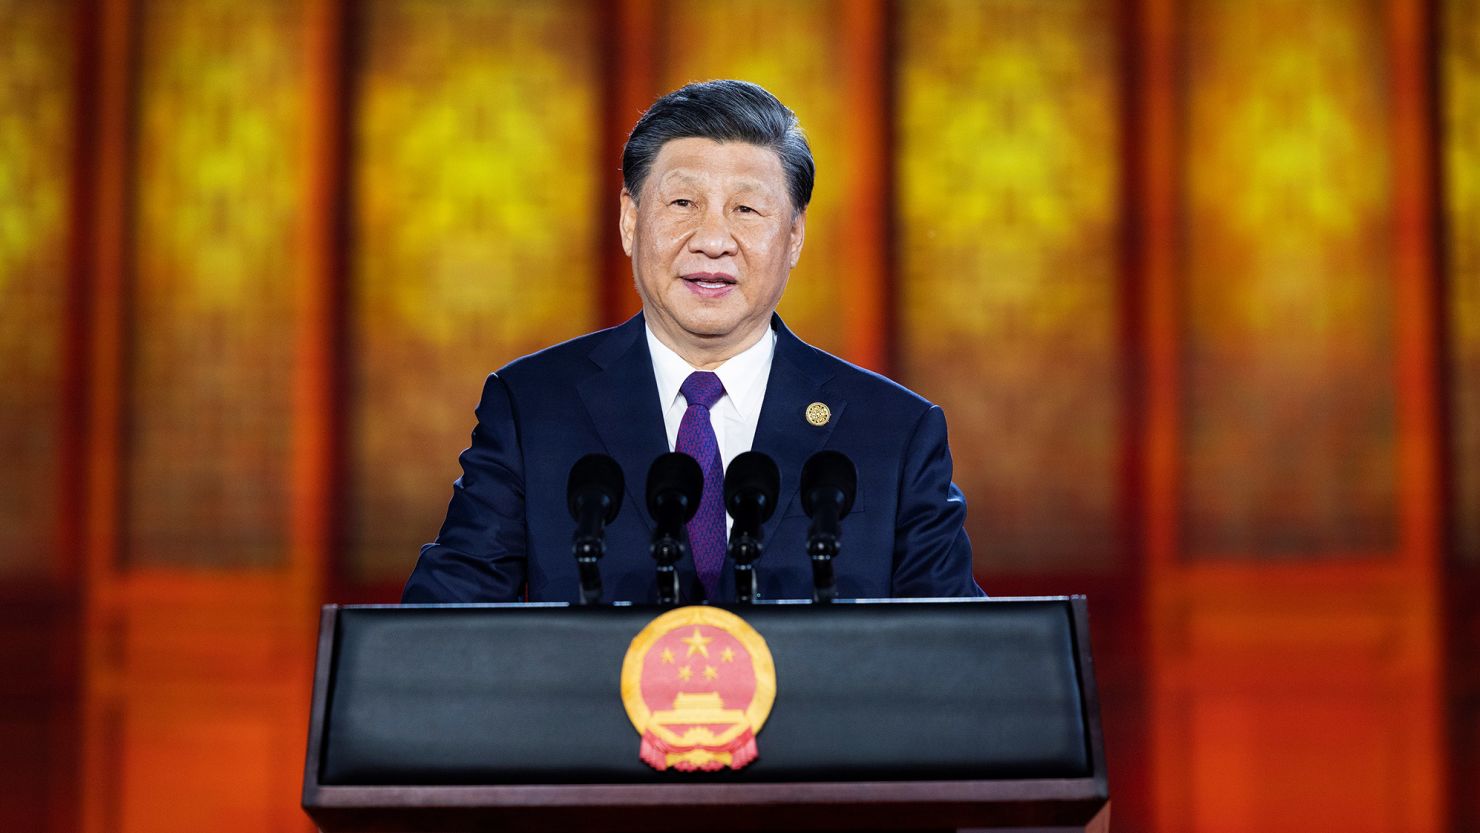 Chinese leader Xi Jinping speaks at the China-Central Asia Summit held this past May in Xi'an.